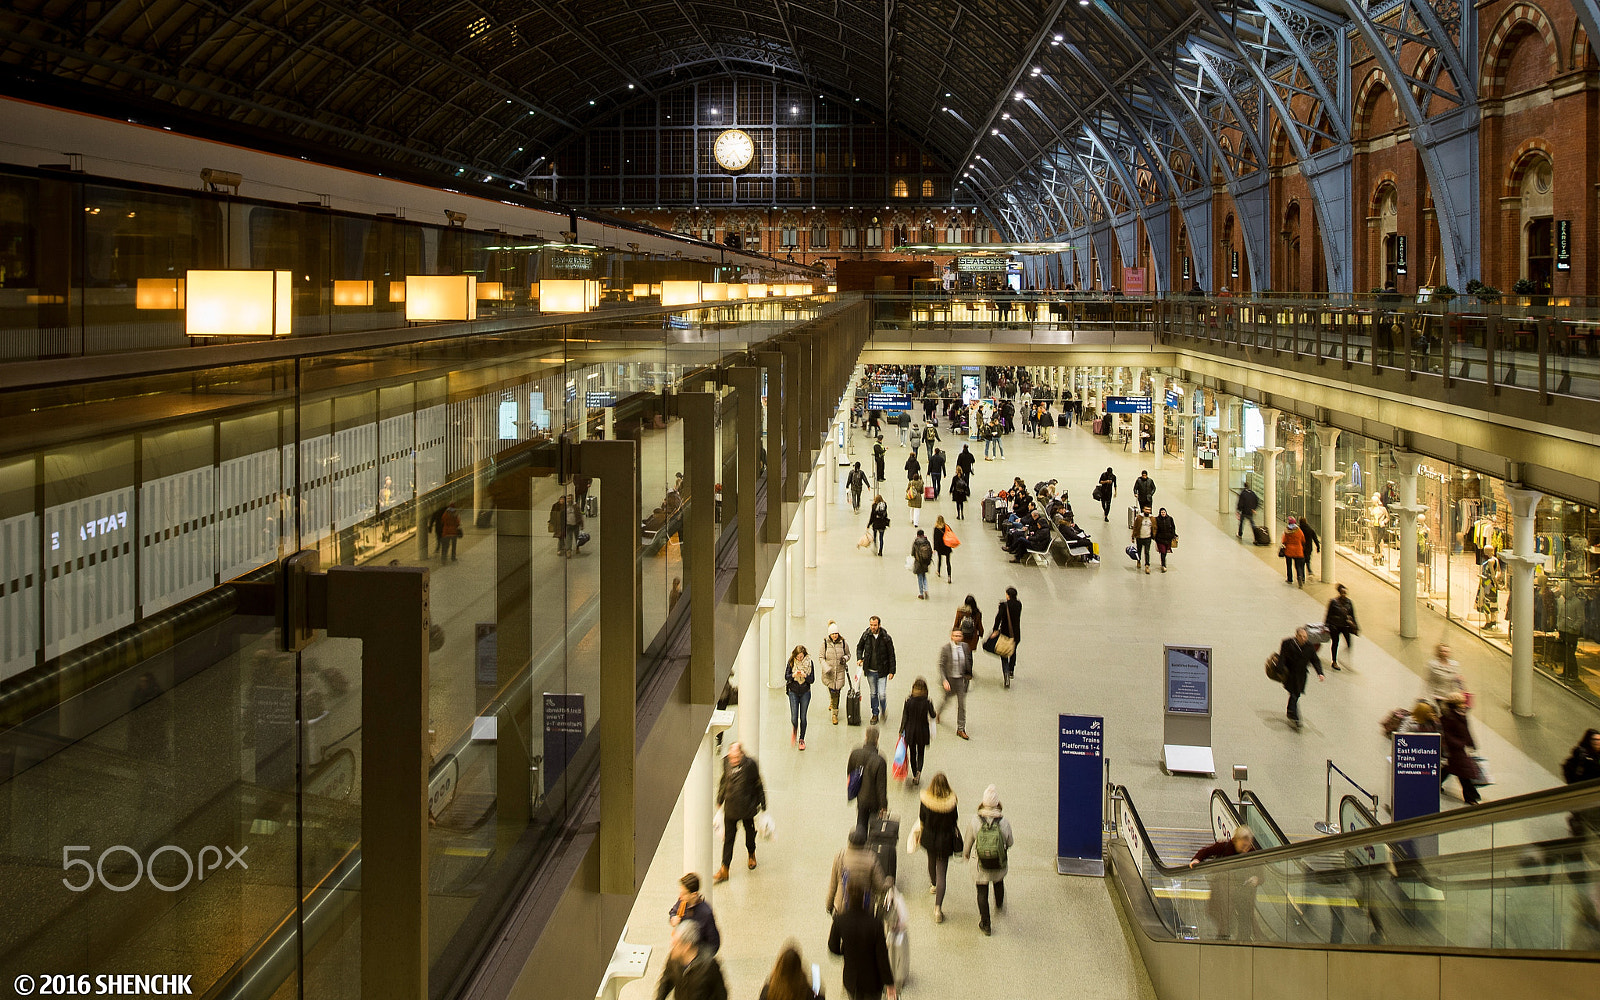 24mm F3.5 sample photo. St. pancras railway station in london photography